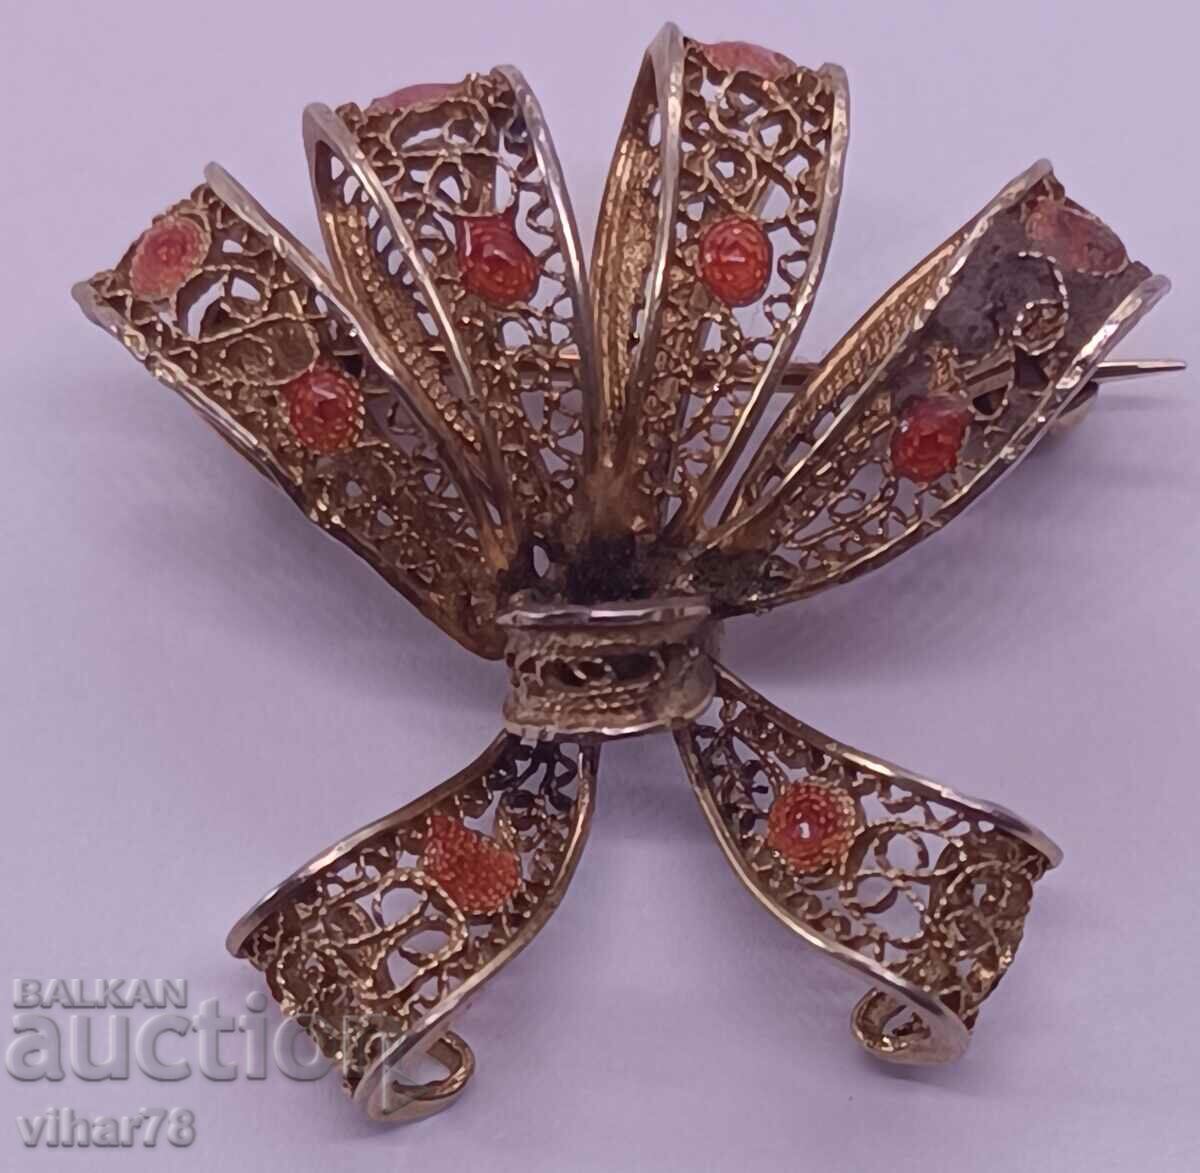 OLD BROOCH-SILVER-SAMPLE 800-ONLY BY PERSONAL DELIVERY